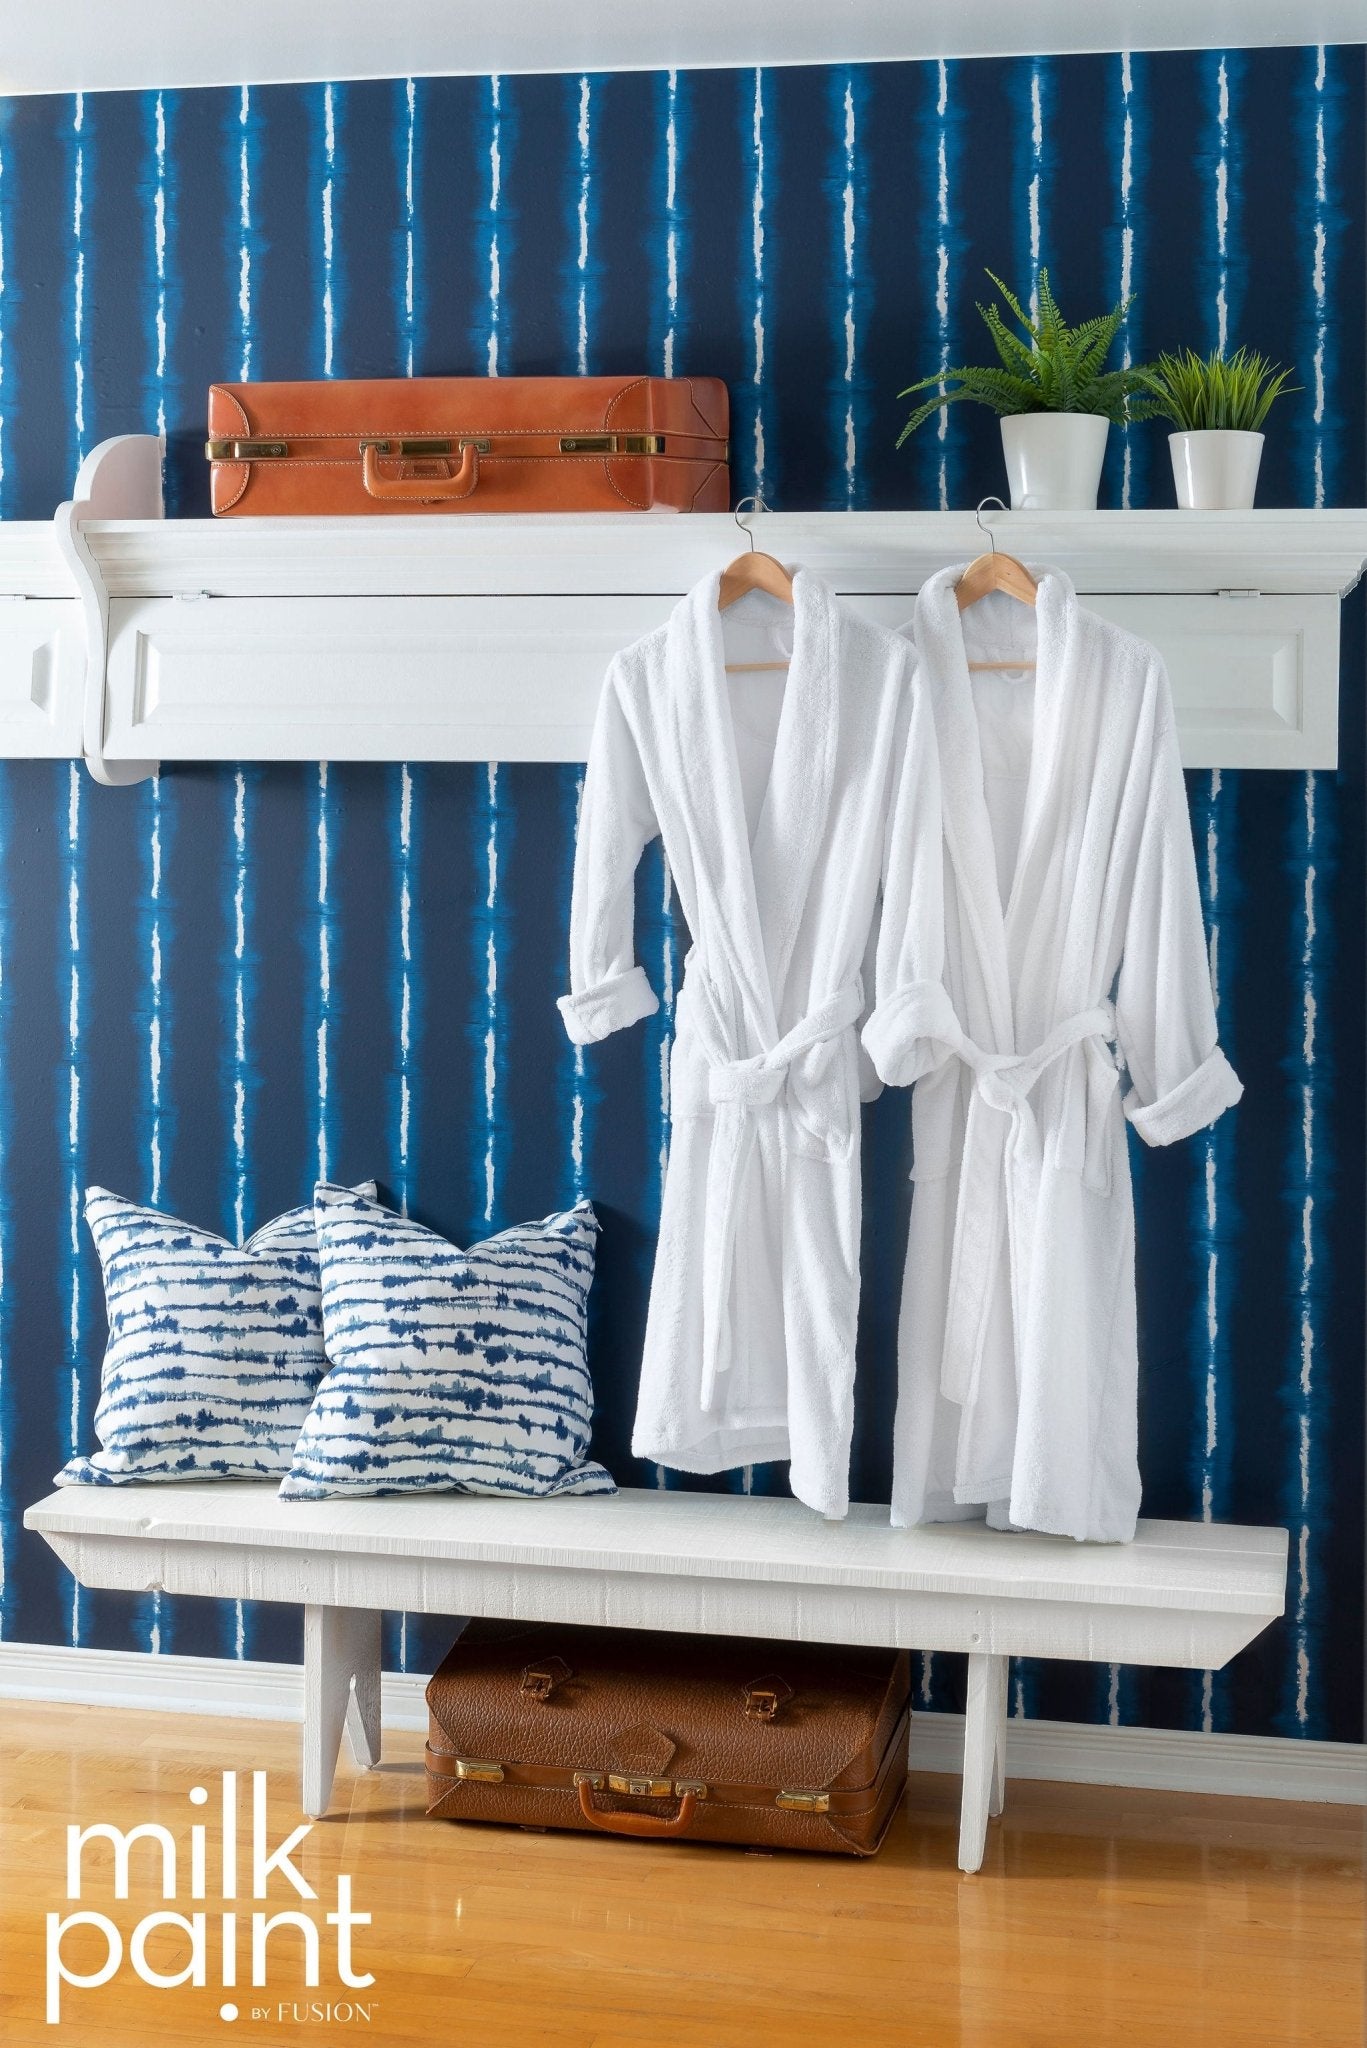 Milk Paint by Fusion - Hotel Robe - Rustic River Home